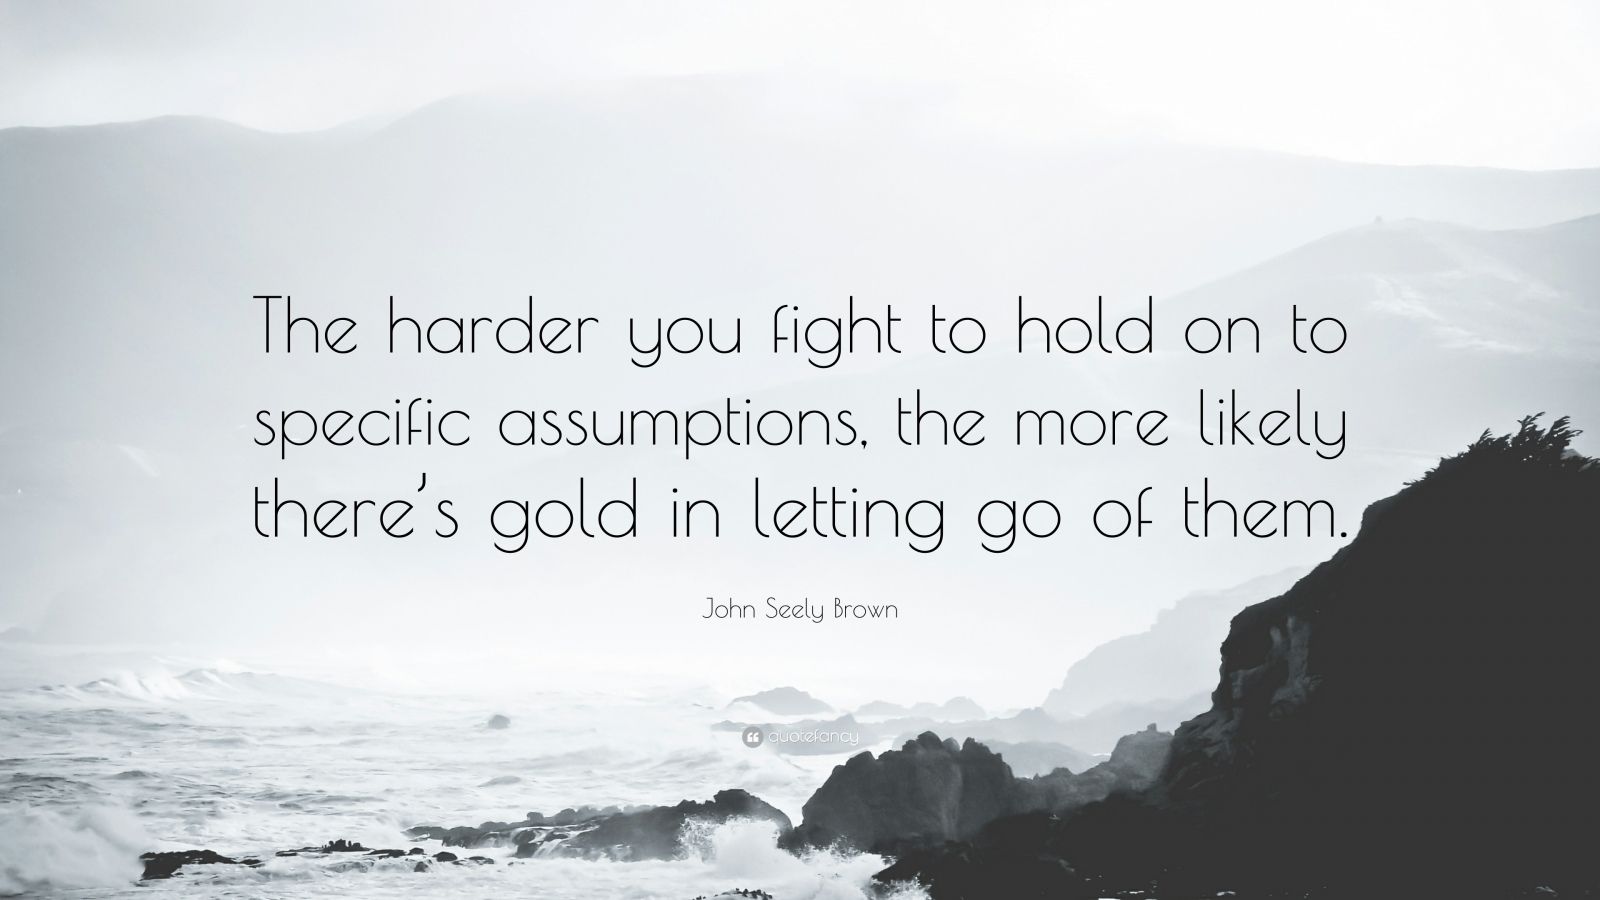 John Seely Brown Quote: “The harder you fight to hold on to specific